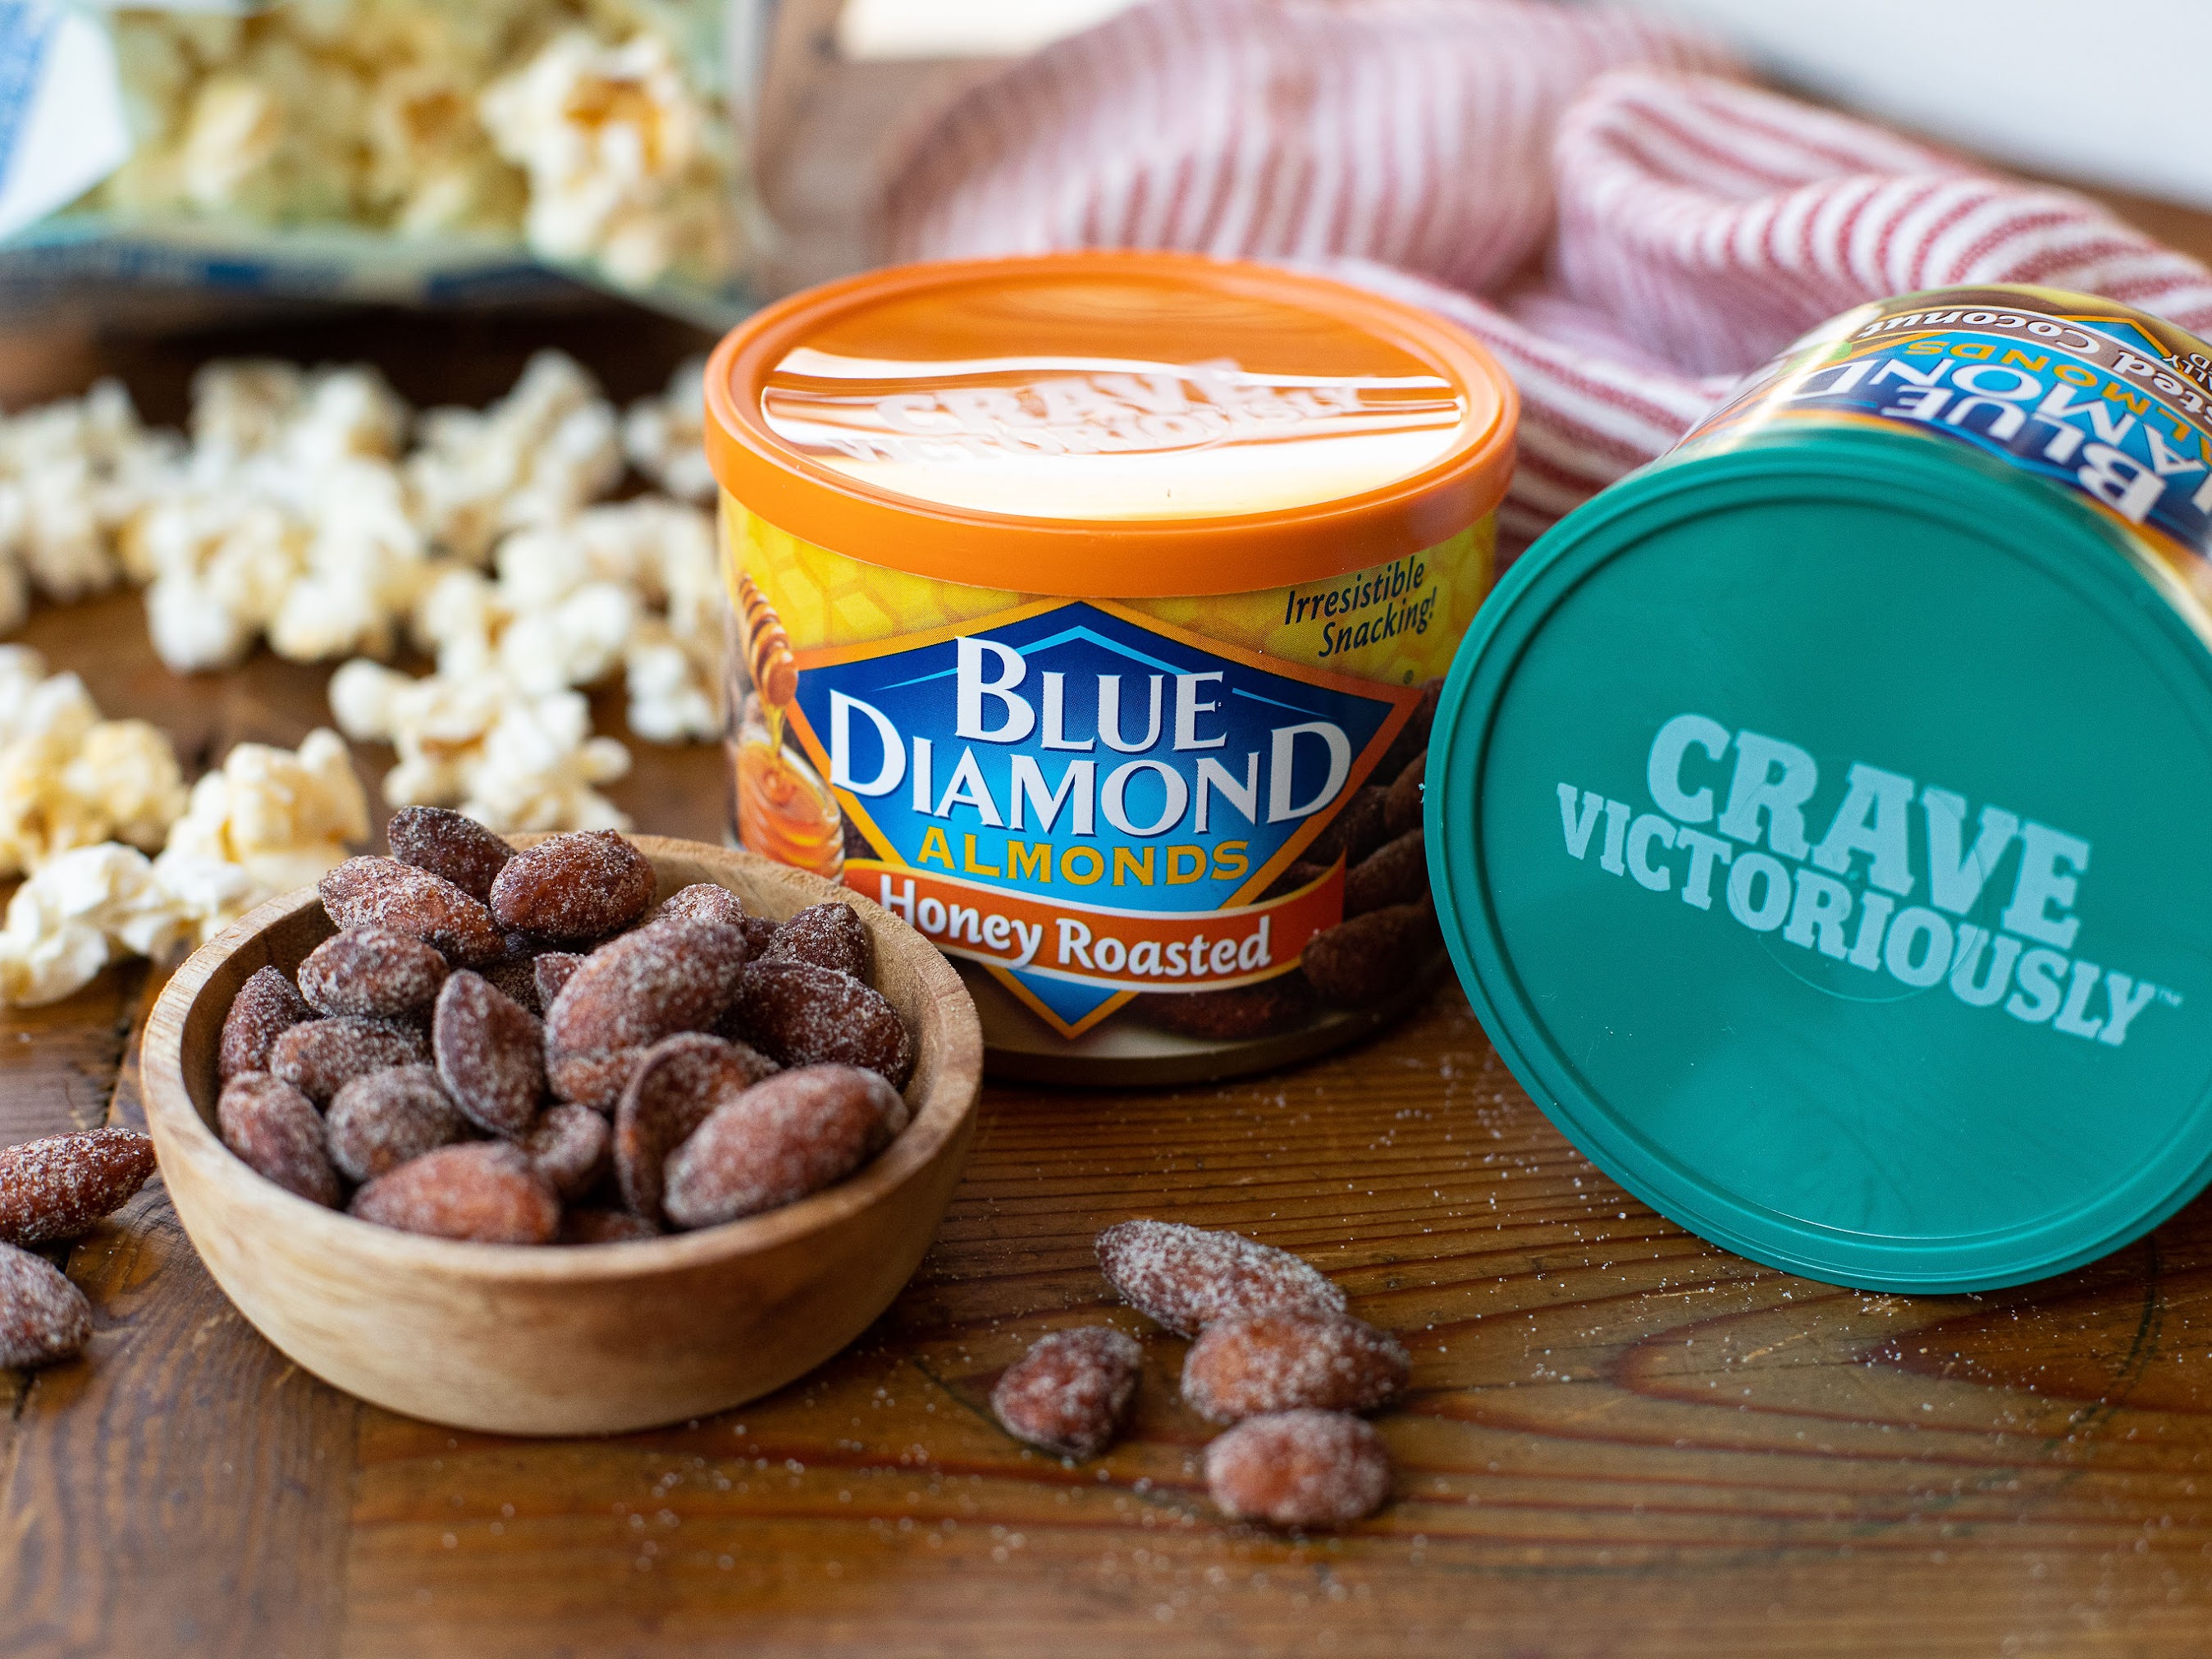 Get Blue Diamond Almonds For As Low As $1.65 Per Can At Publix